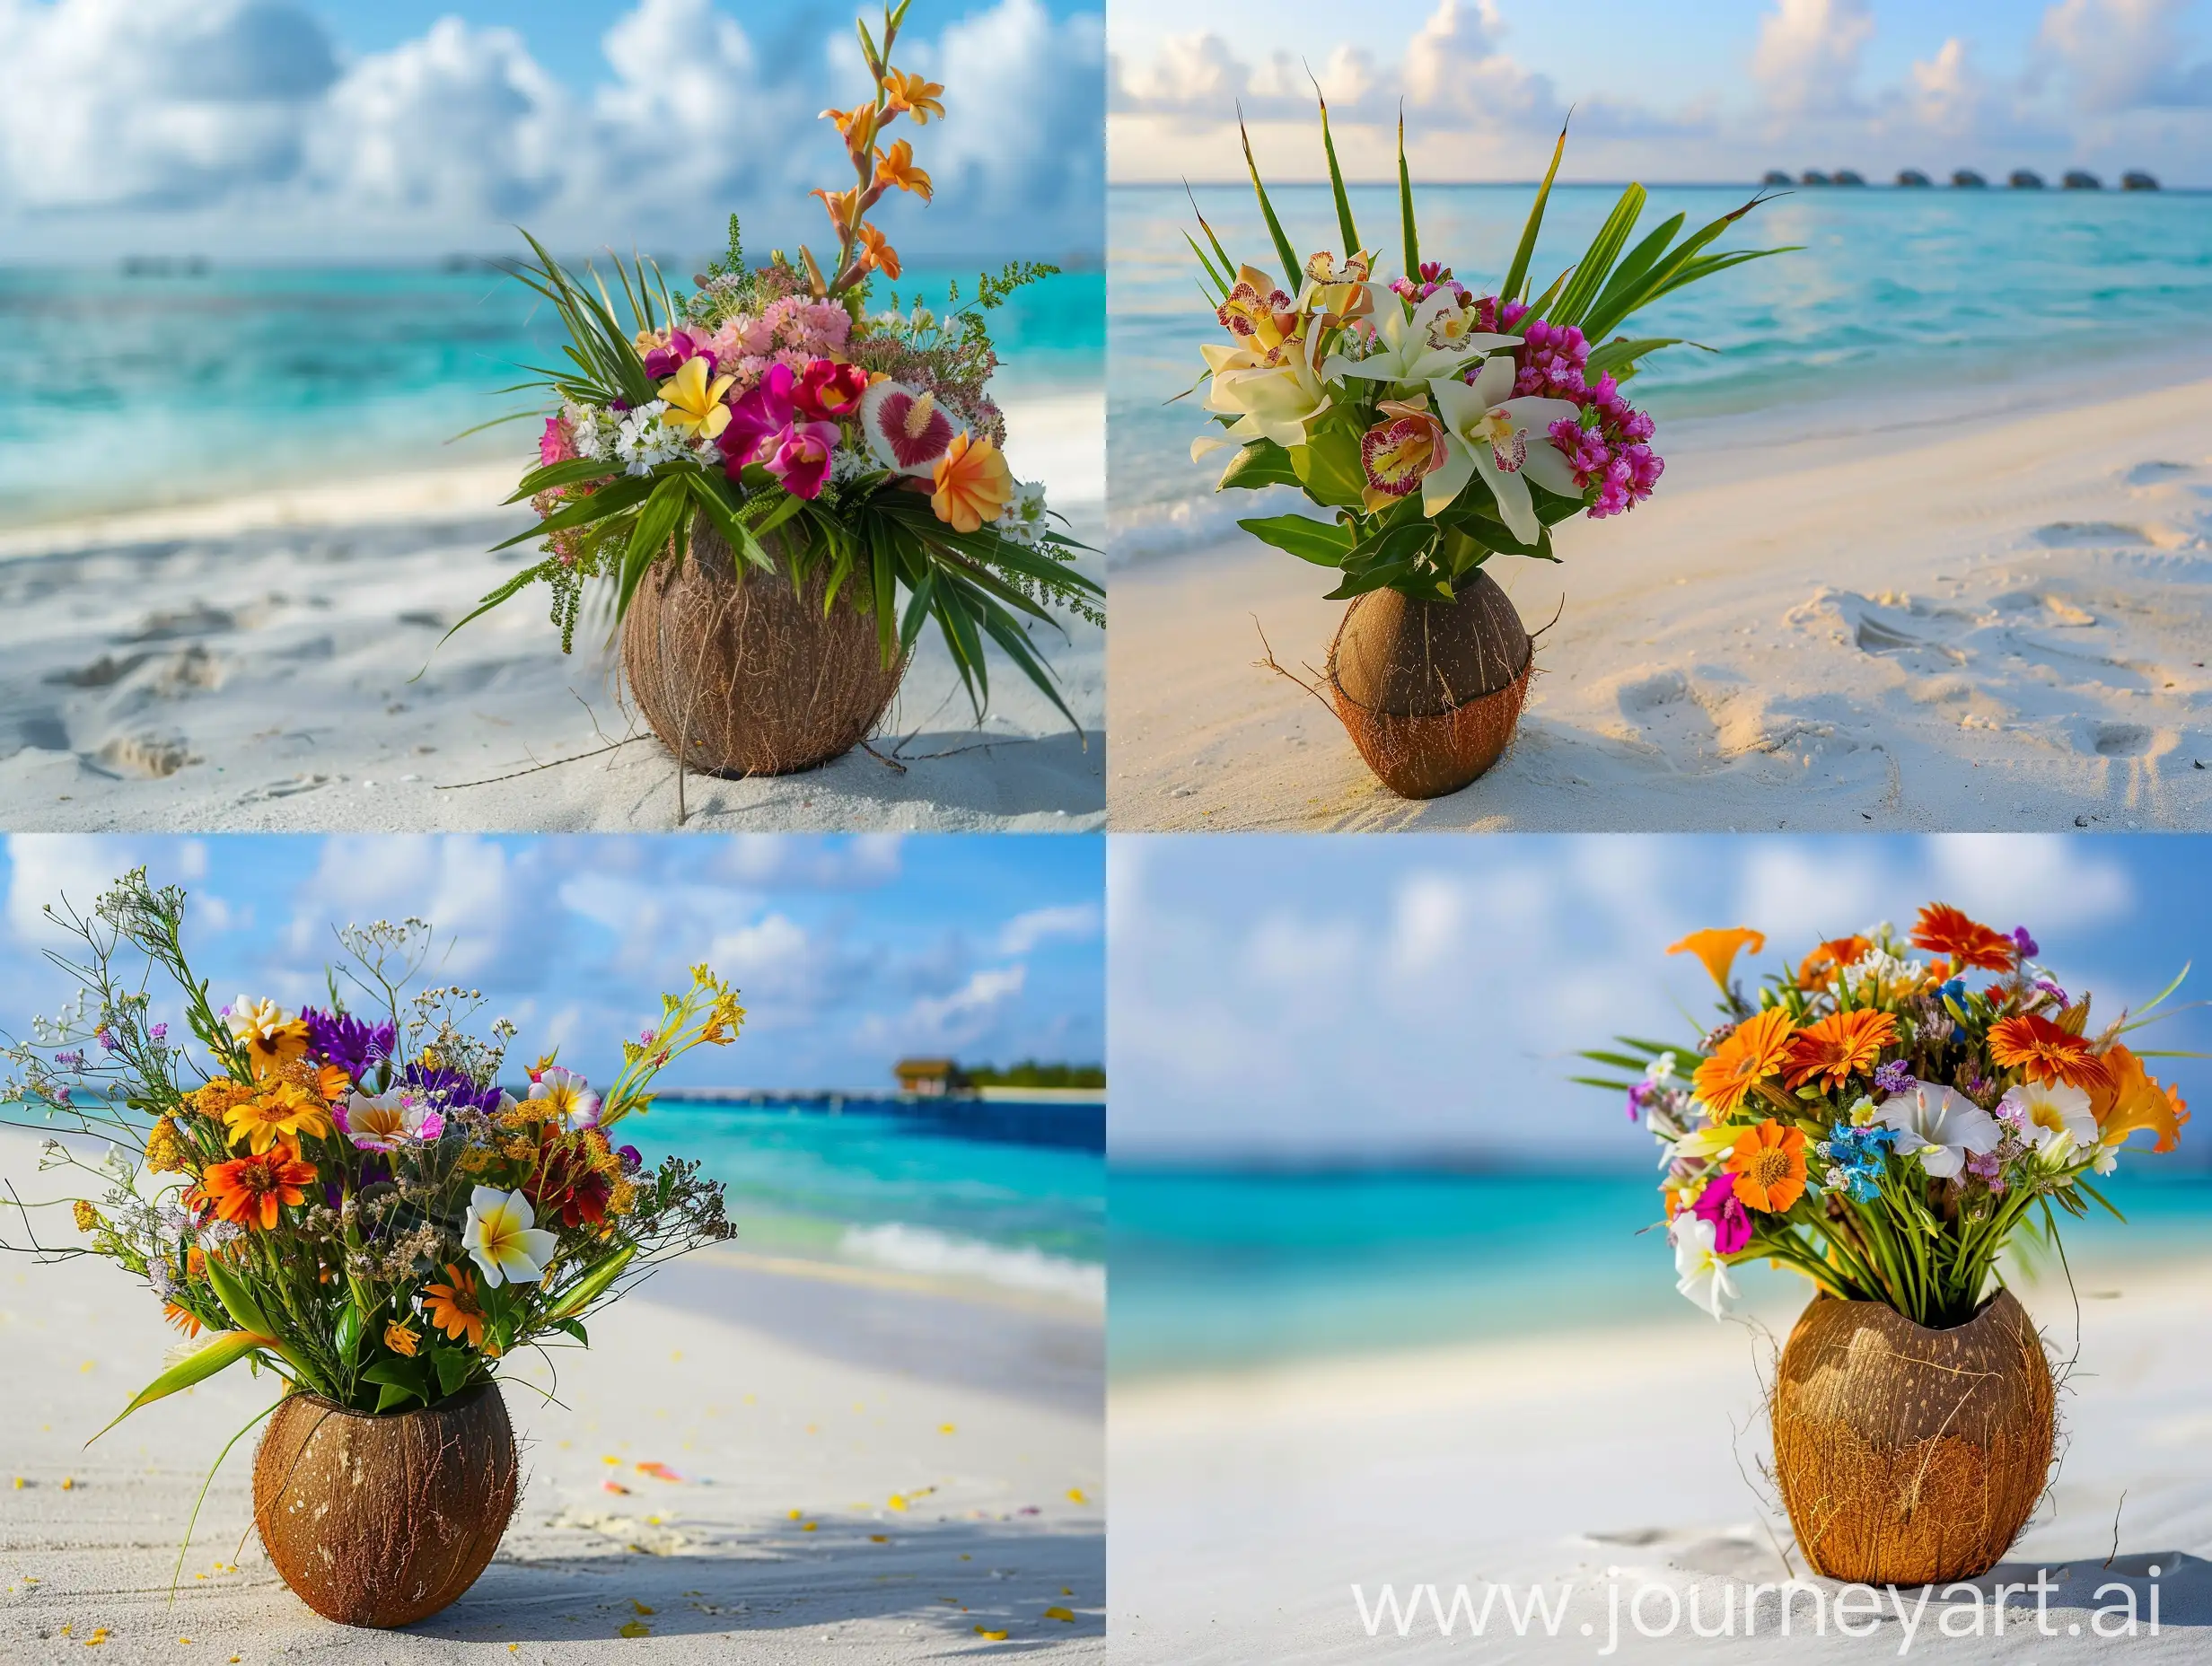 Bouquet of tropical flowers  in coconut on sandy beach in Maldives.